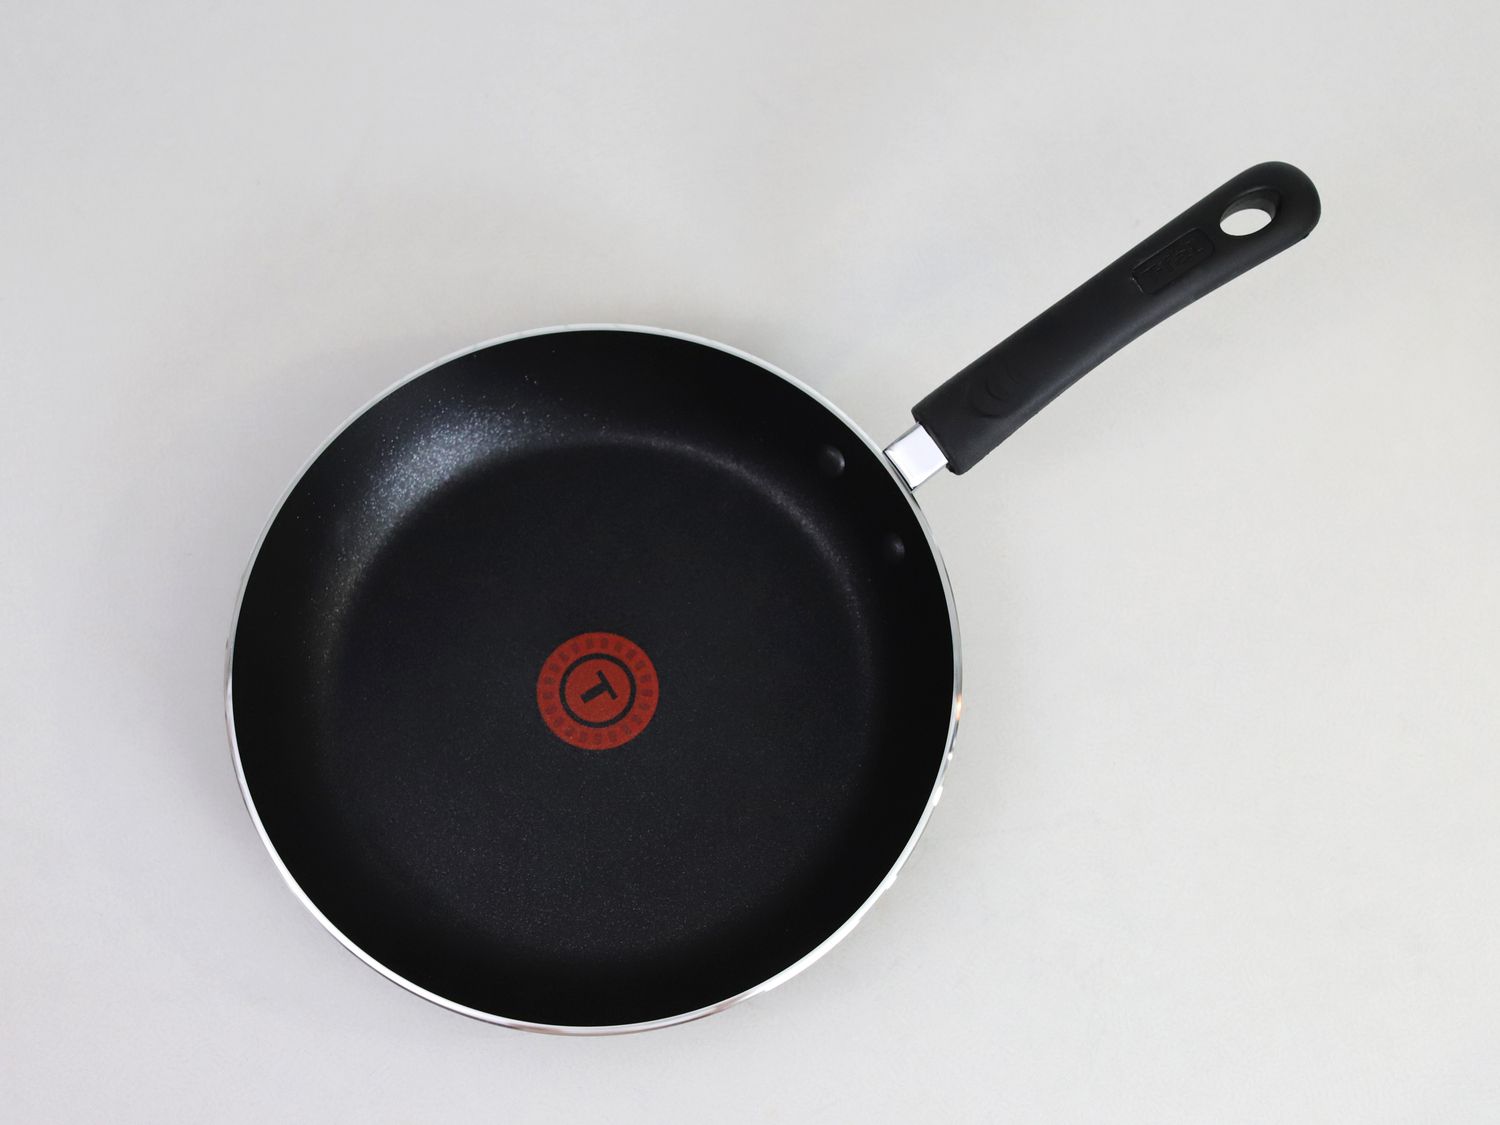 an overhead look at the T-fal nontick skillet sitting on a white surface